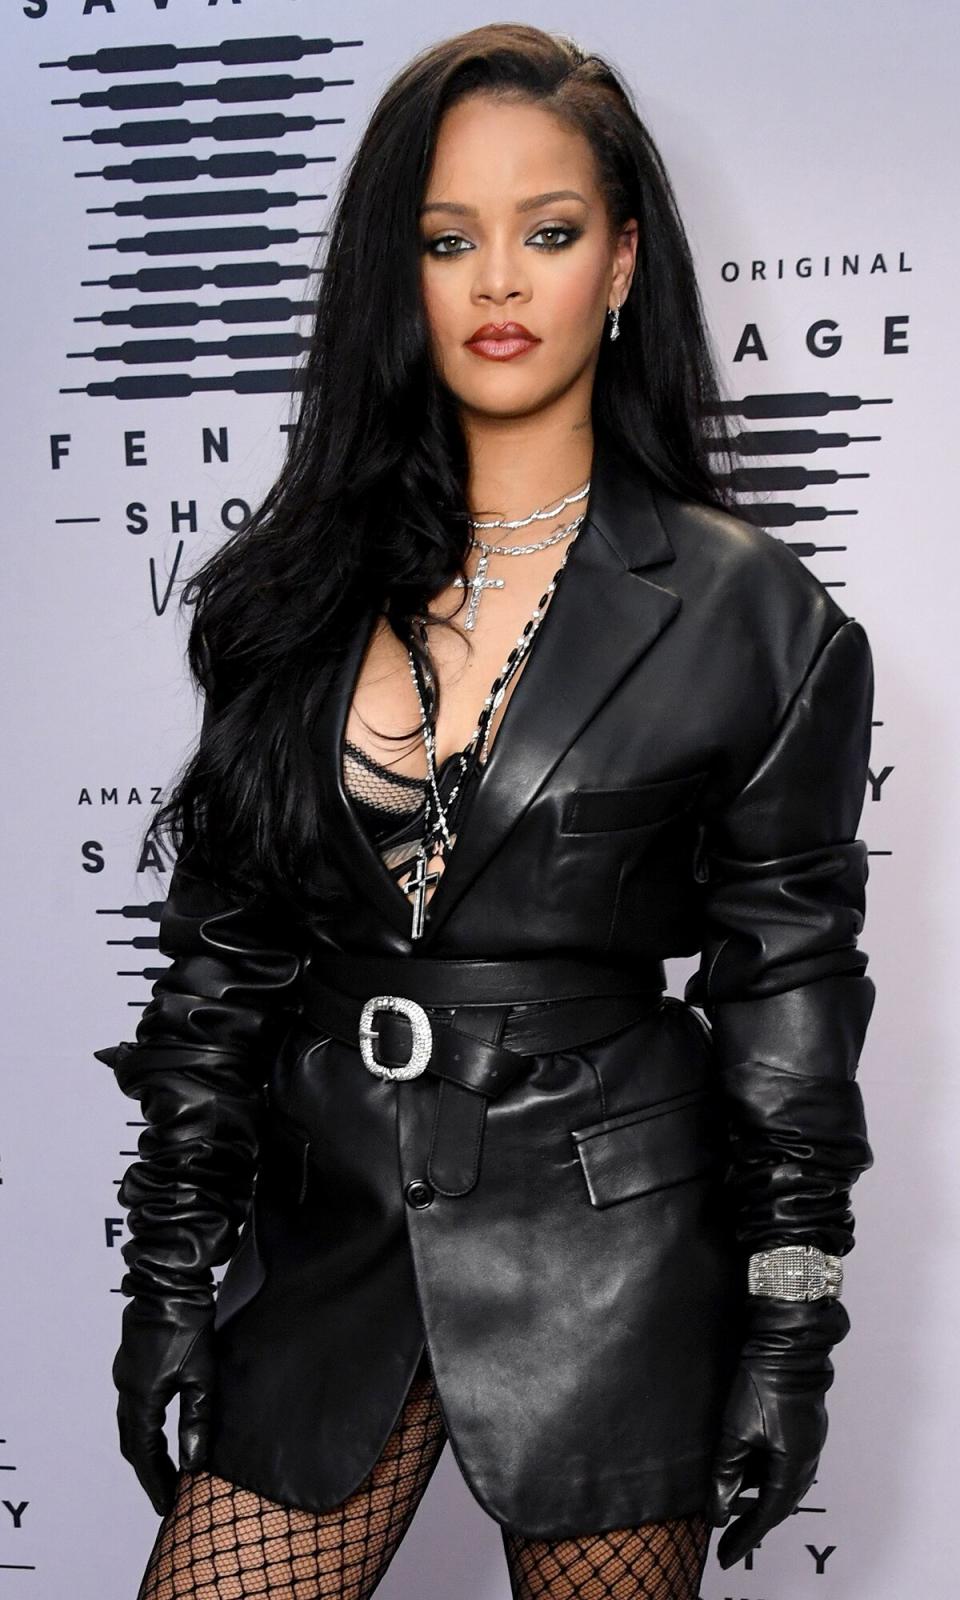 Rihanna attends the second press day for Rihanna's Savage X Fenty Show Vol. 2 presented by Amazon Prime Video at the Los Angeles Convention Center in Los Angeles, California; and broadcast on October 2, 2020